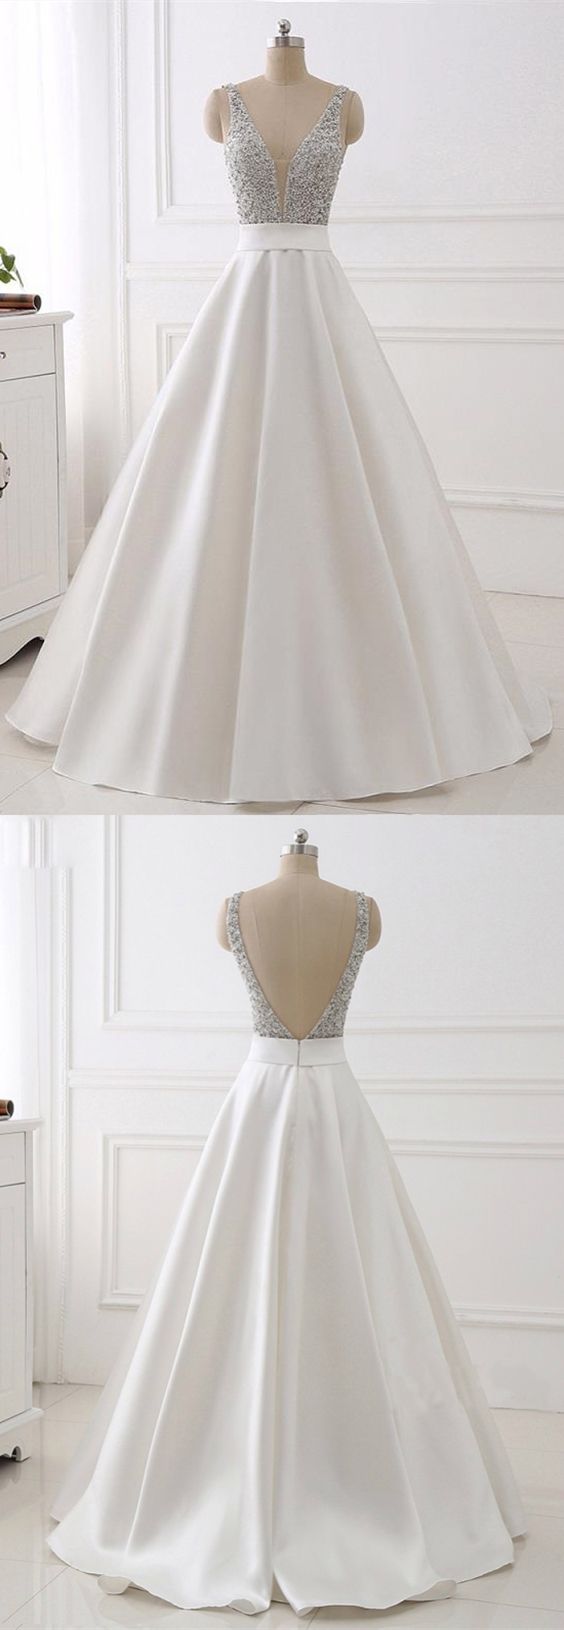 Ball Gown Deep V-neck Sweep Train White Satin Prom Dress With Beading,custom Made